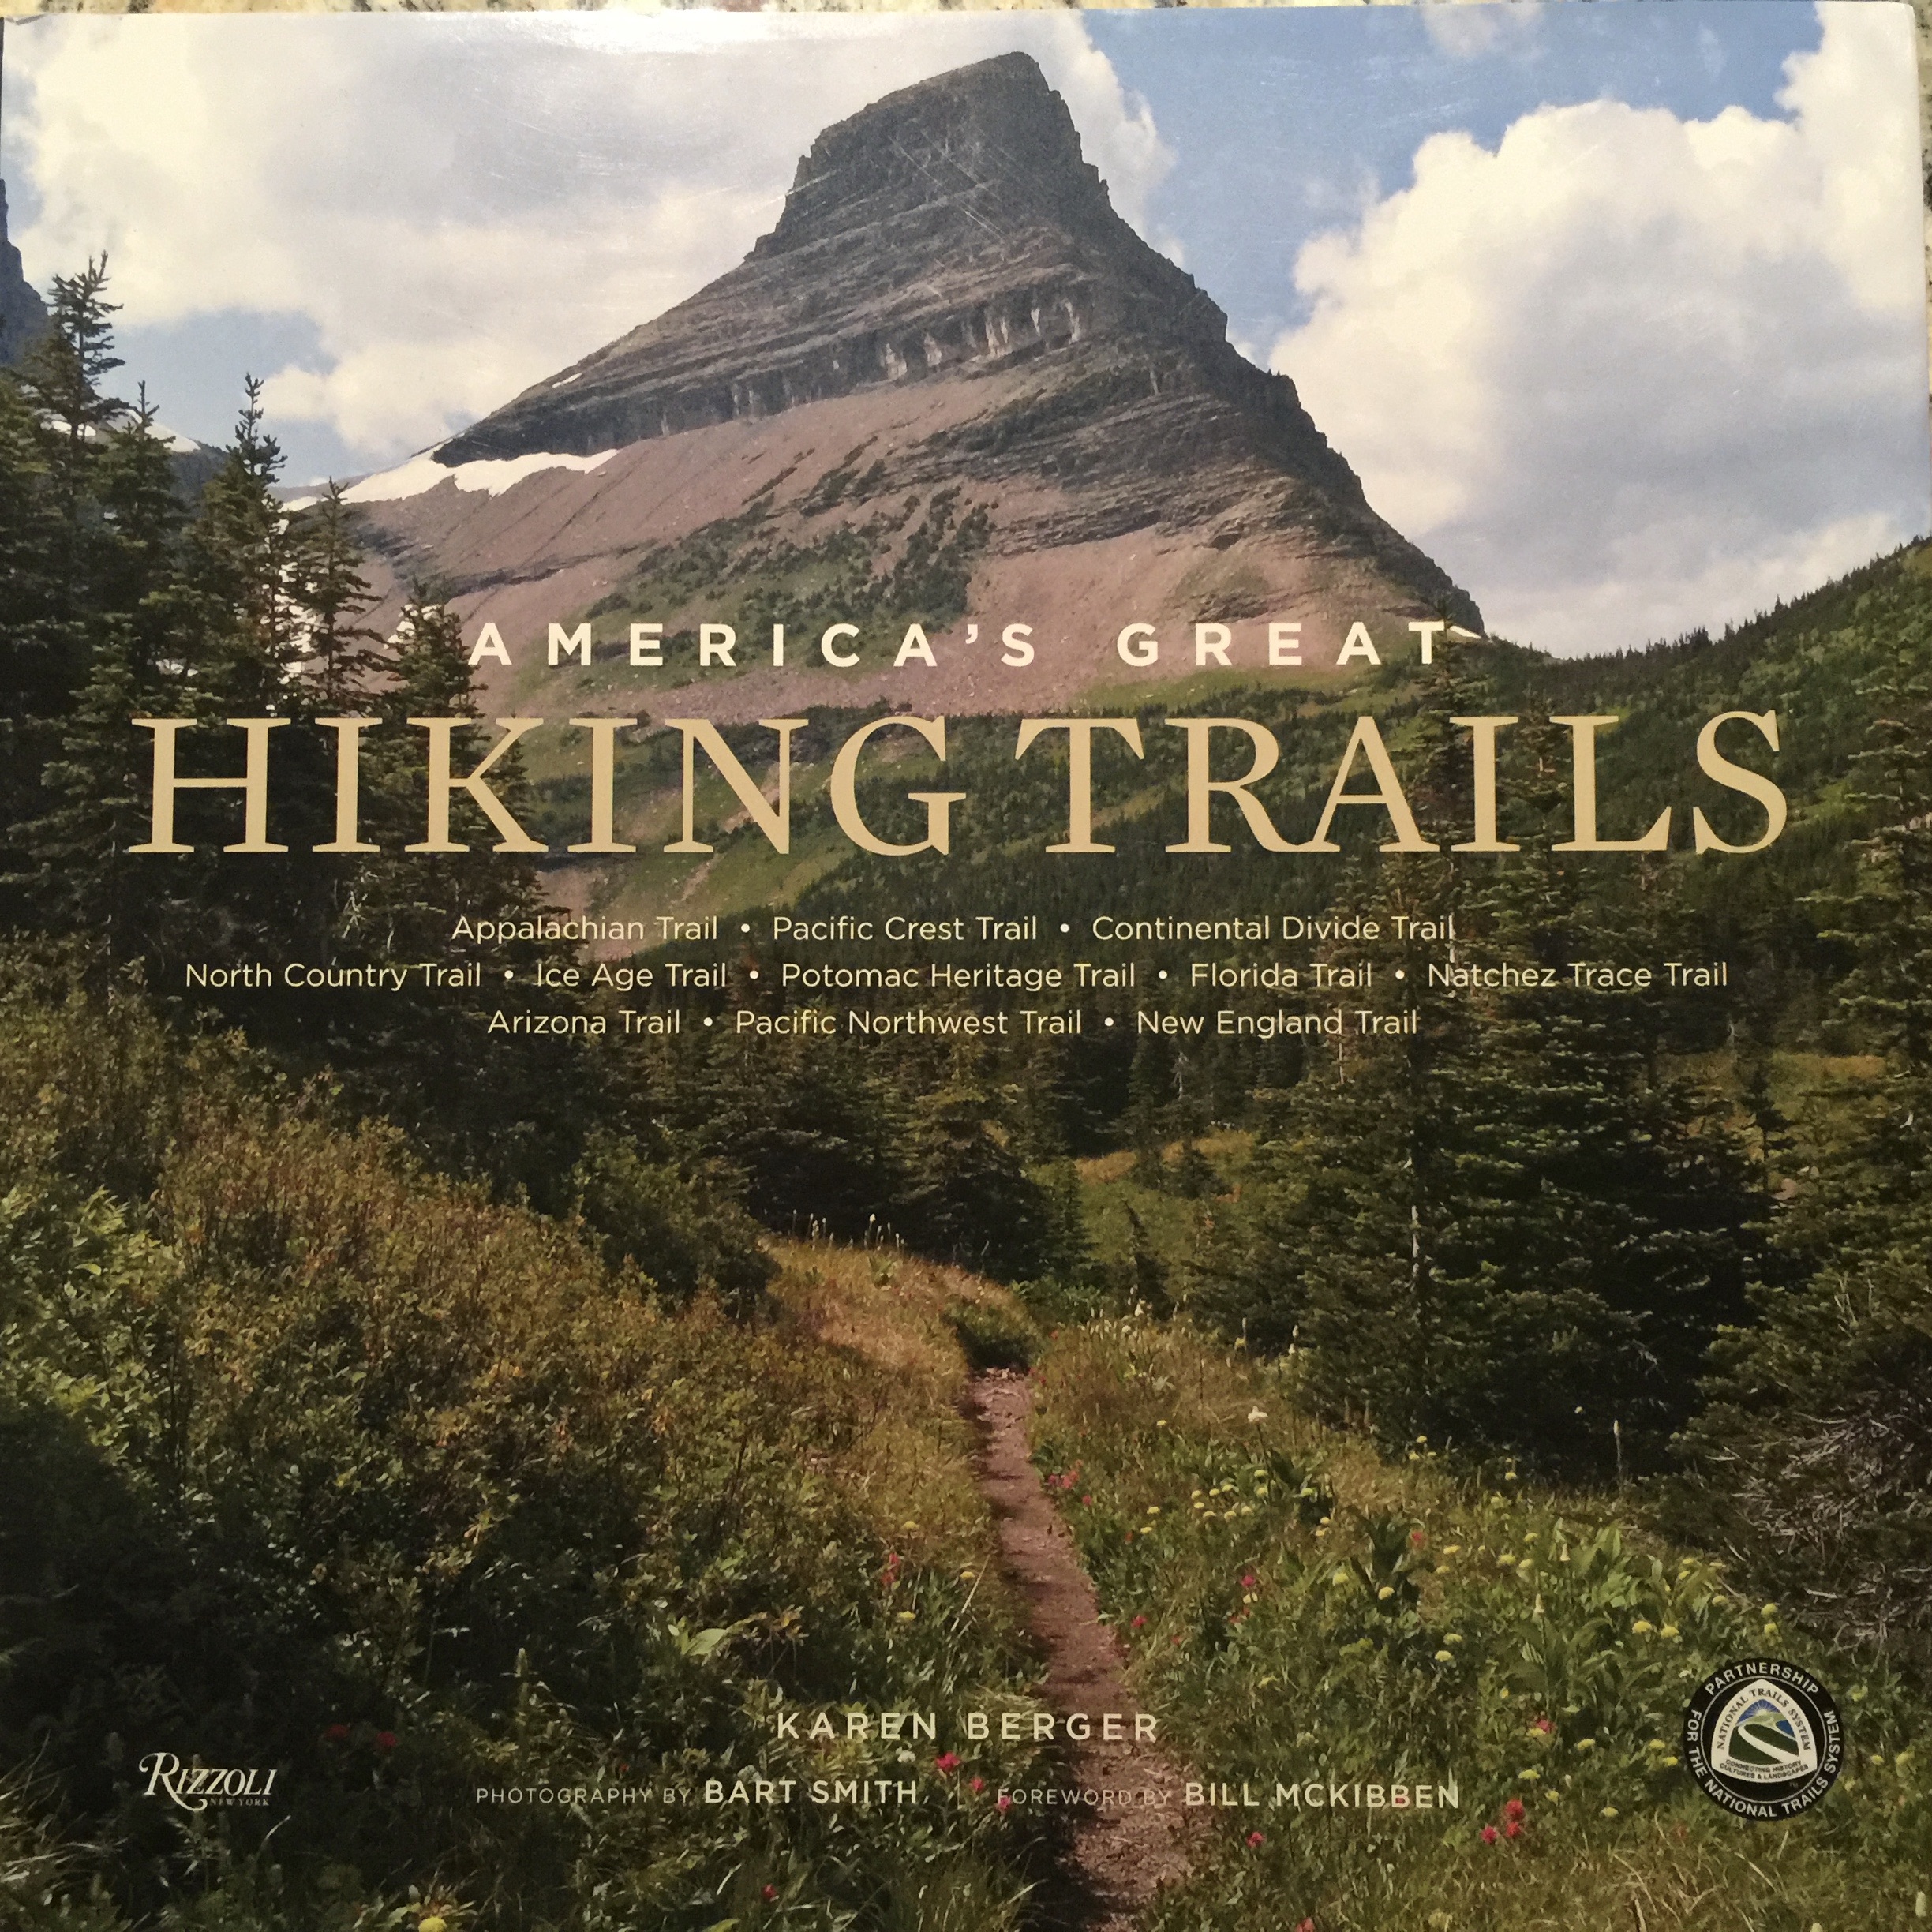 America’s Great Hiking Trails: NY Times Travel Bestseller, Lowell Thomas Gold Award